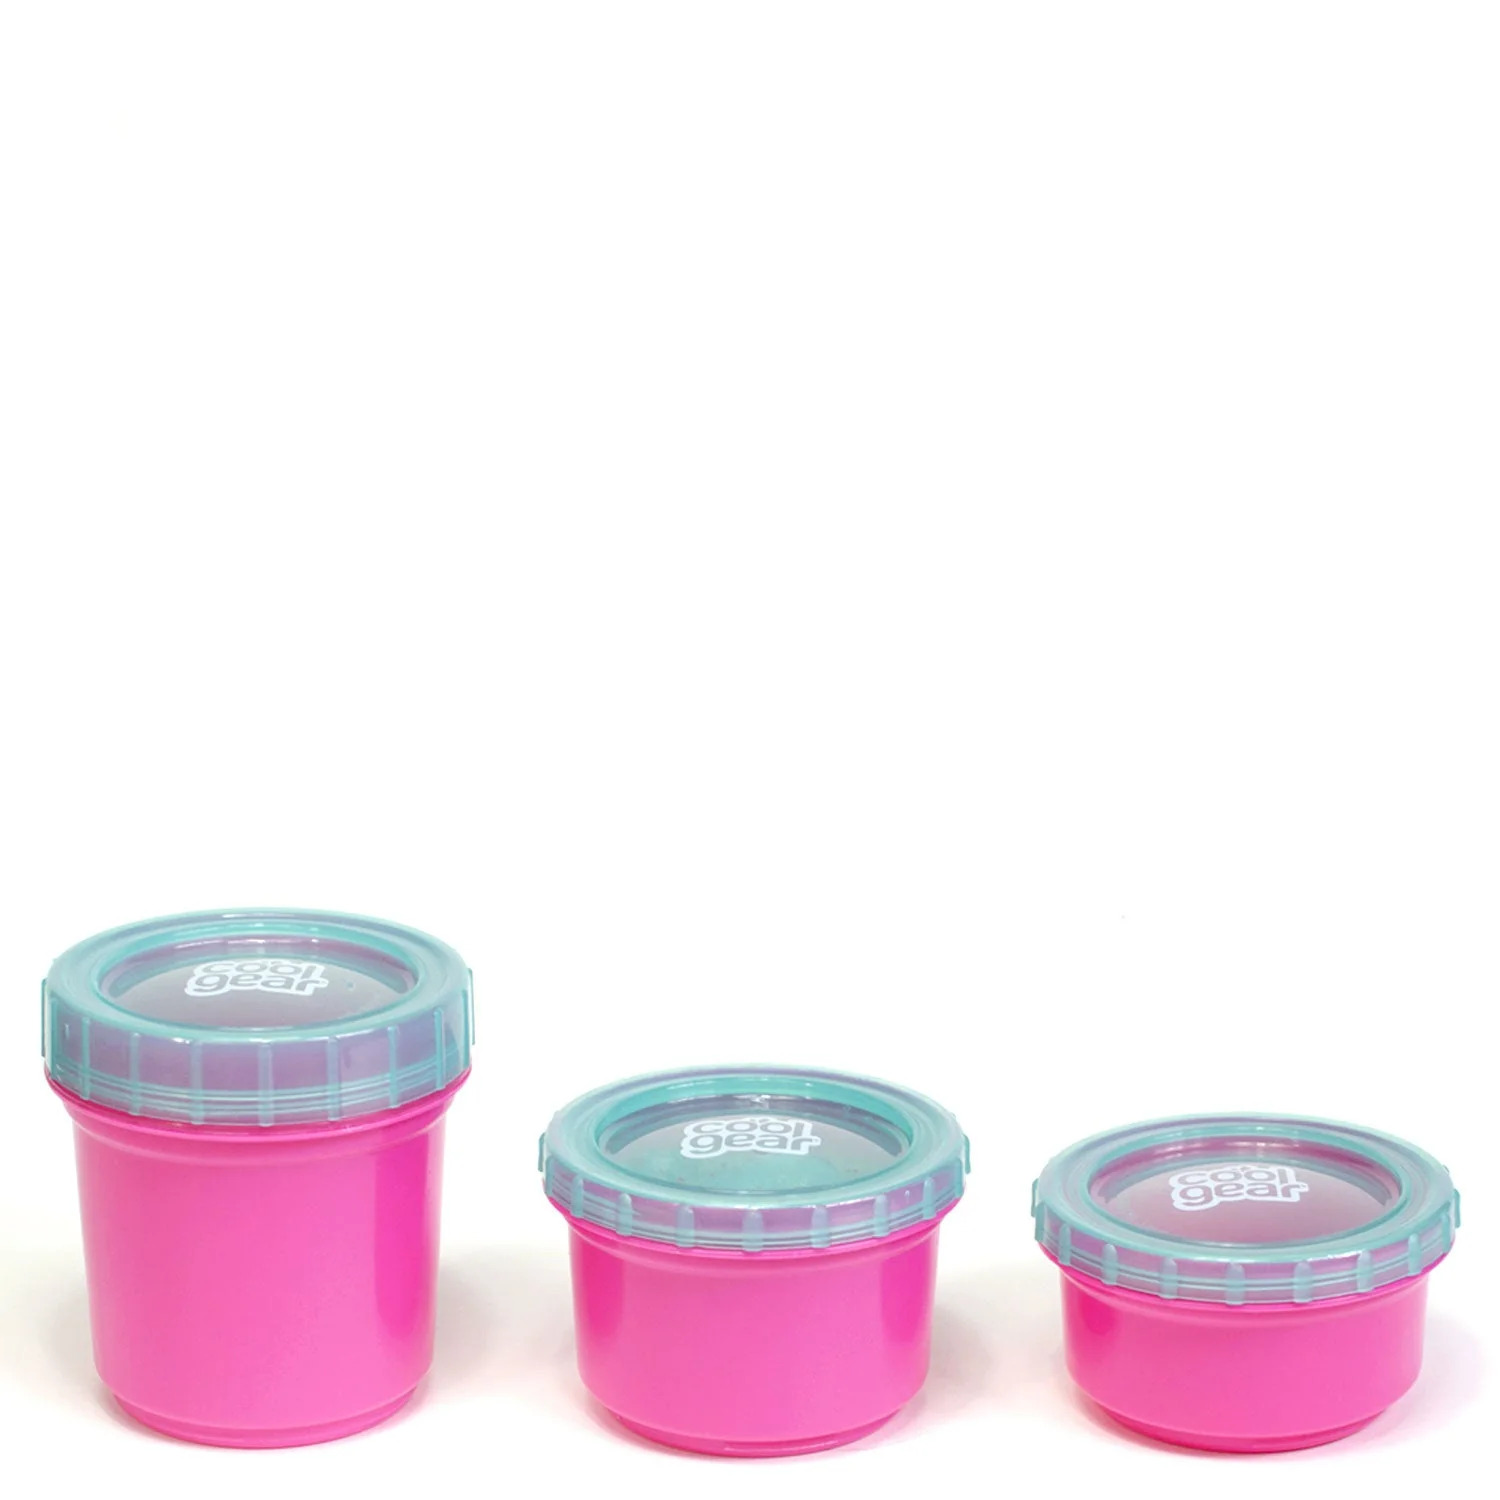 Cool Gear 2-Pack Kids Stackable Snack Snap Containers with Freezer Gel | 3 Reusable Food Containers With Twist Off Lids | Double Insulated with Freezer Gel To Keep Food Cold - Pink/Purple - image 4 of 5